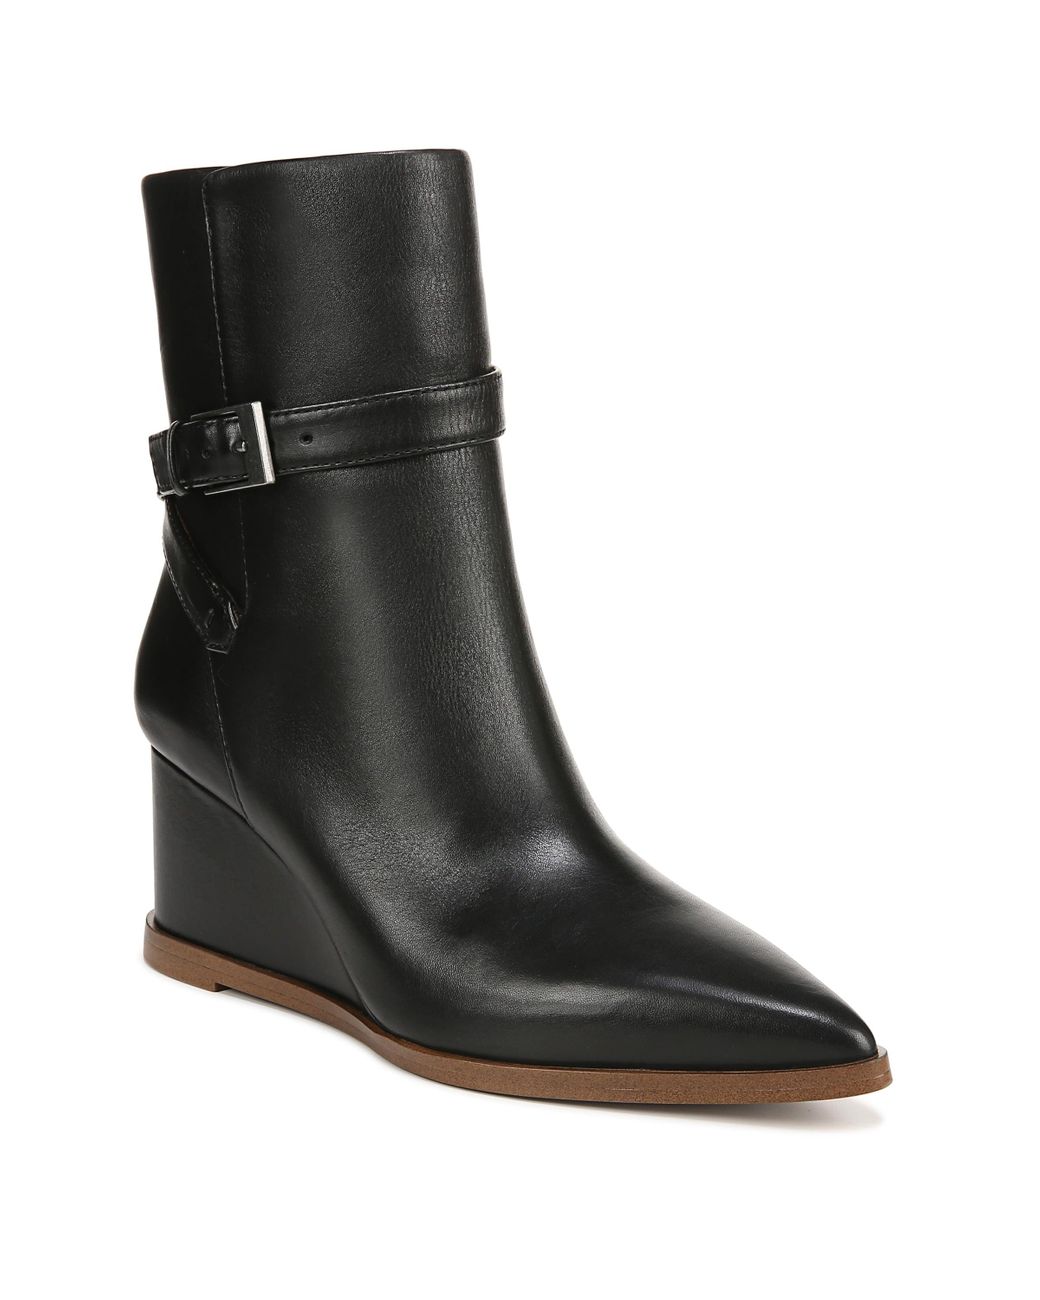 Franco Sarto Emina Pointed Toe Wedge Bootie Ankle Boot in Black | Lyst